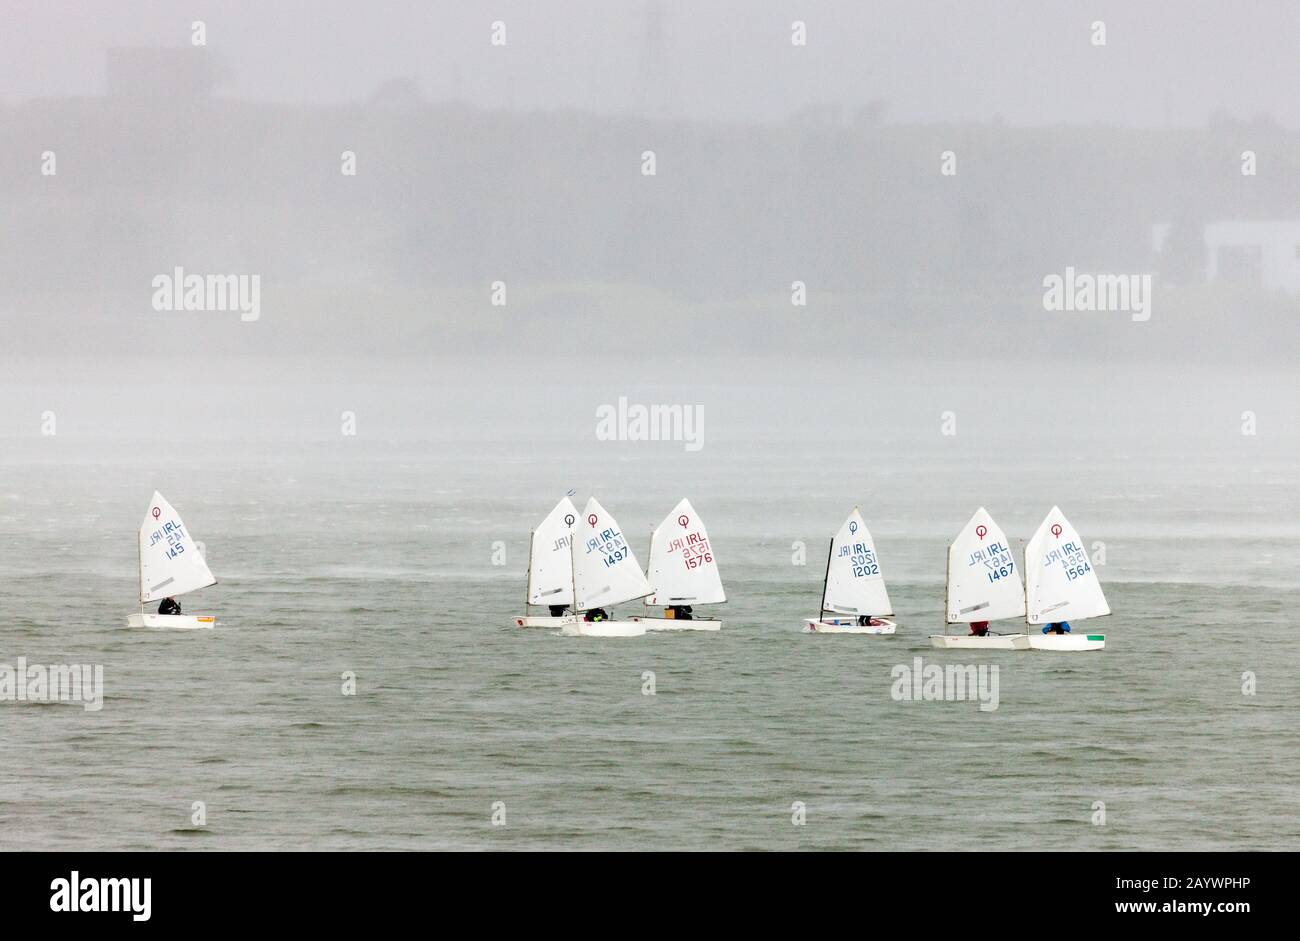 Crosshaven, Cork, Ireland. 17th February, 2020. A group of Optimist dinghies from the Royal Cork Yacht Club caught out in a heavy hail shower while training in Cork Harbour at Crosshaven, Co. Cork, Ireland.  - Credit; David Creedon / Alamy Live News Stock Photo